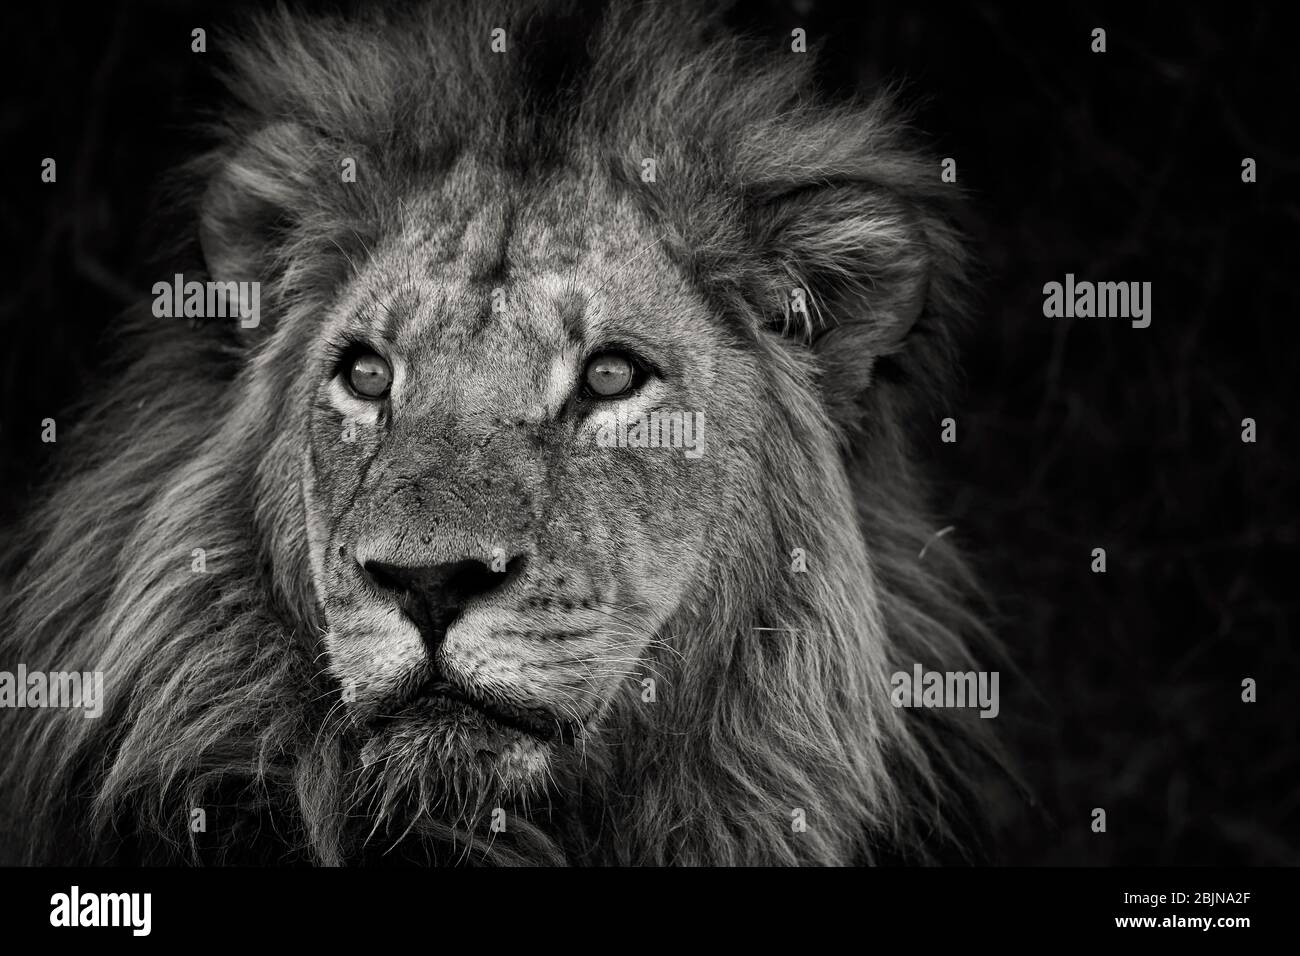 Black And White Lion Portrait High Resolution Stock Photography and ...